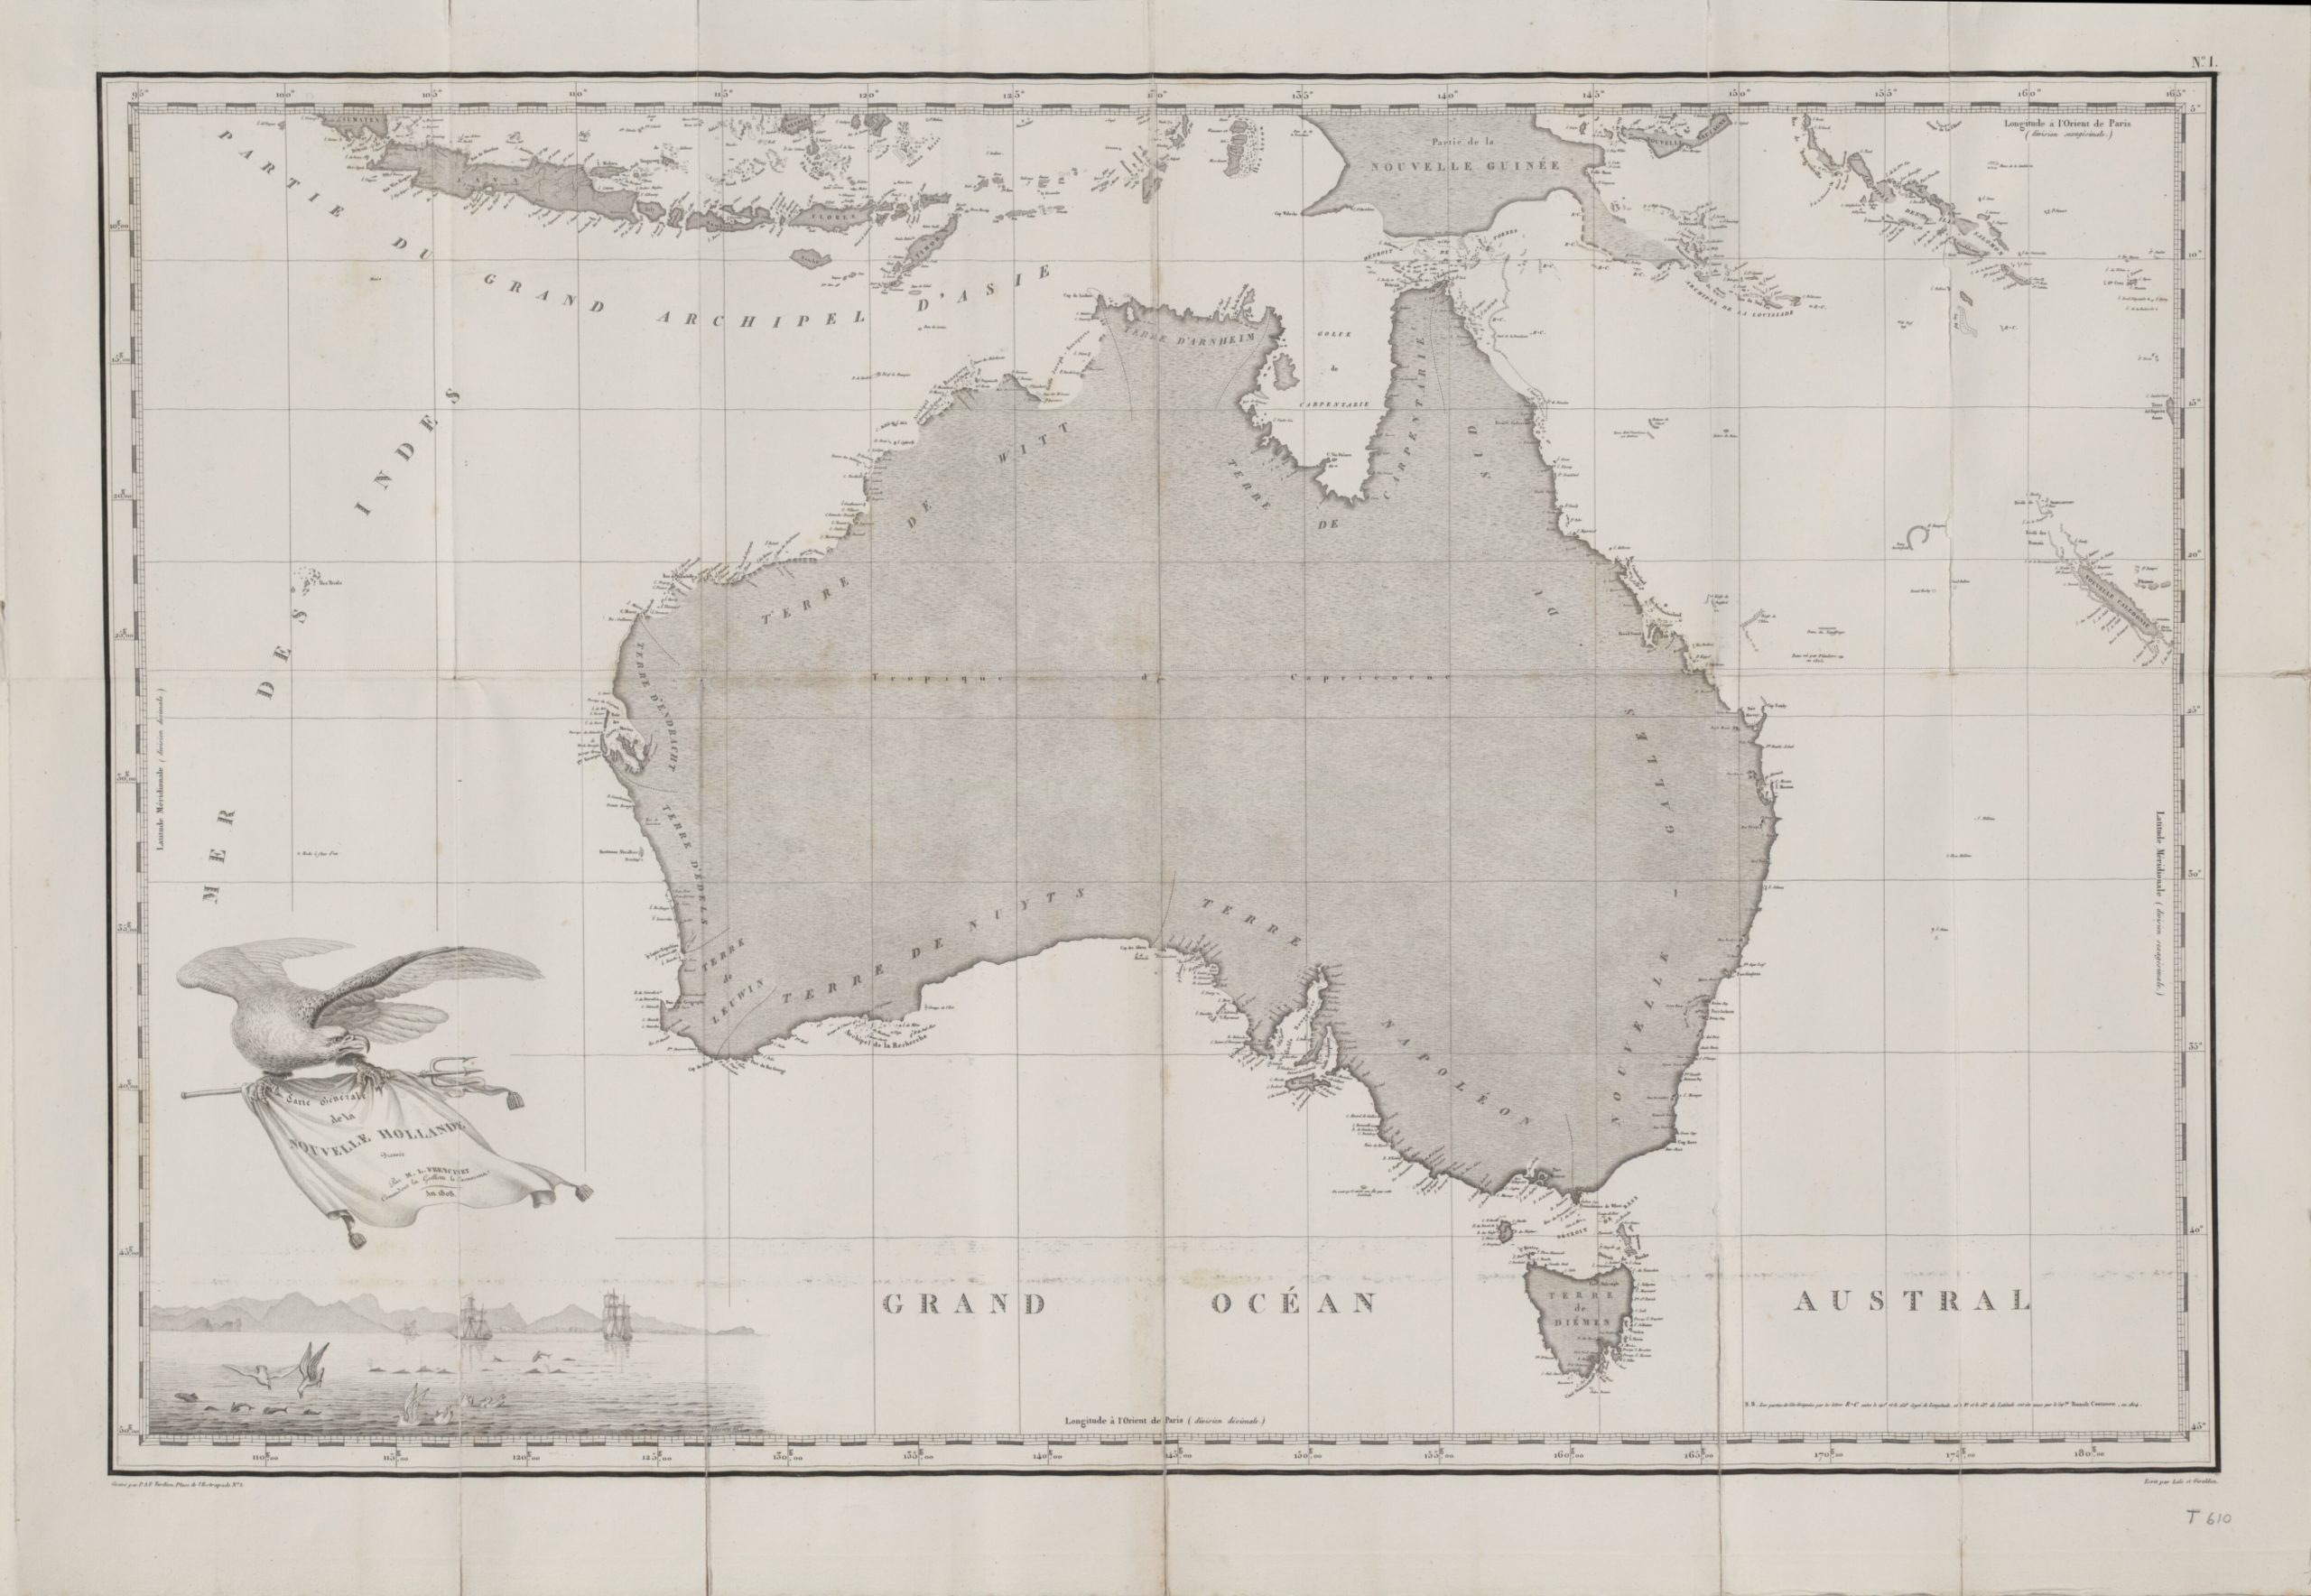 Map of Australia from the Baudin expedition, drawn by Louis de Freycinet